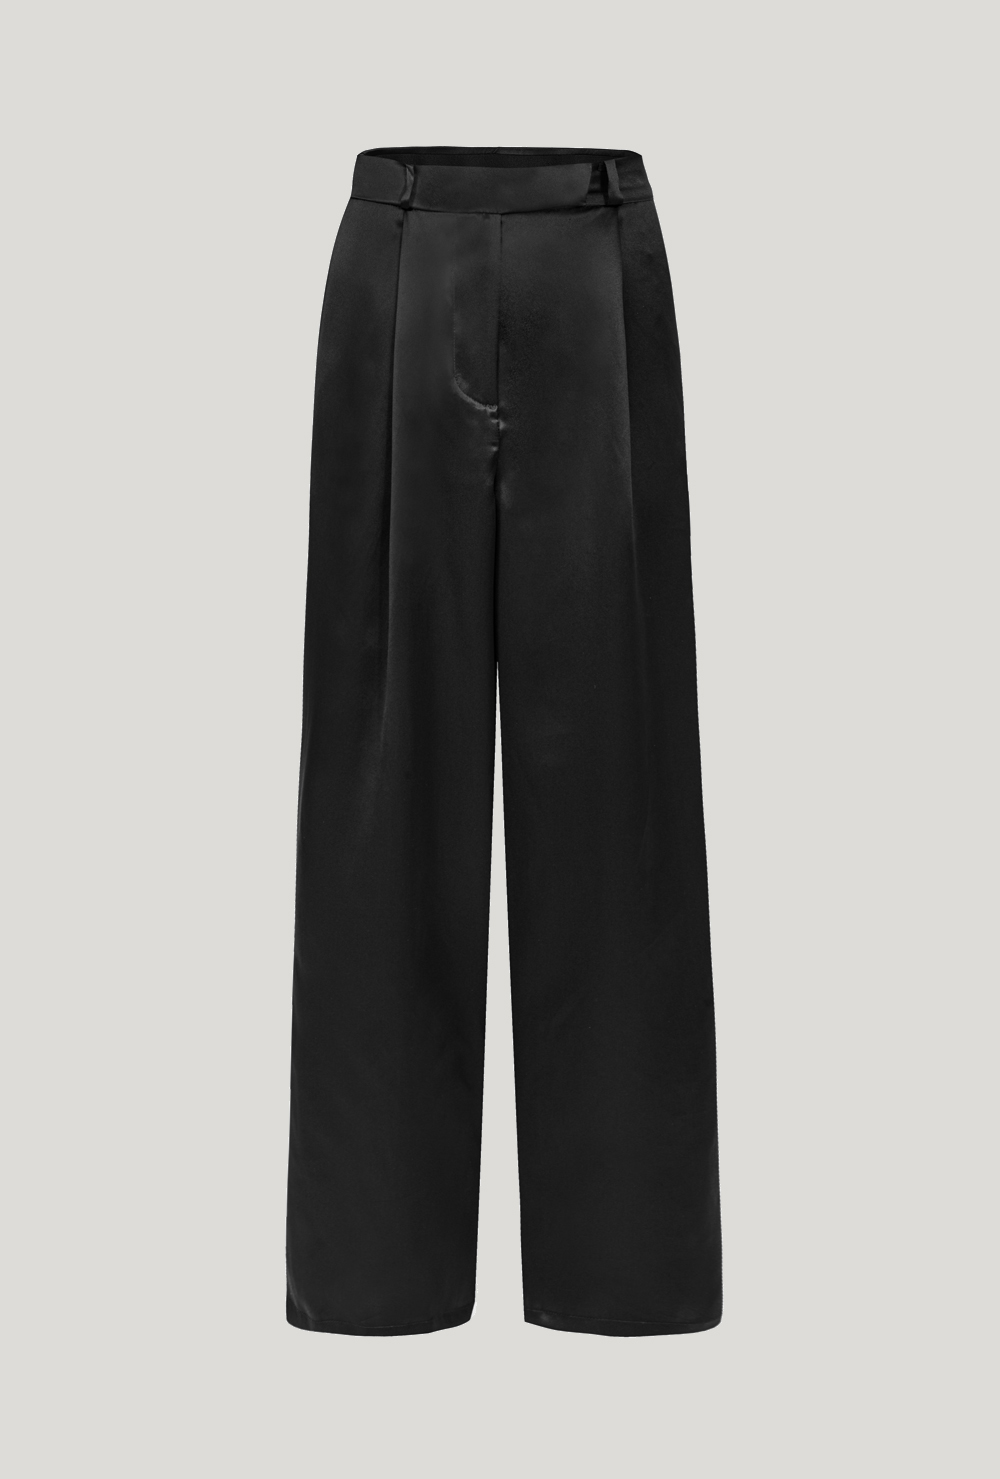 Full-lenght silk trousers made of black satin